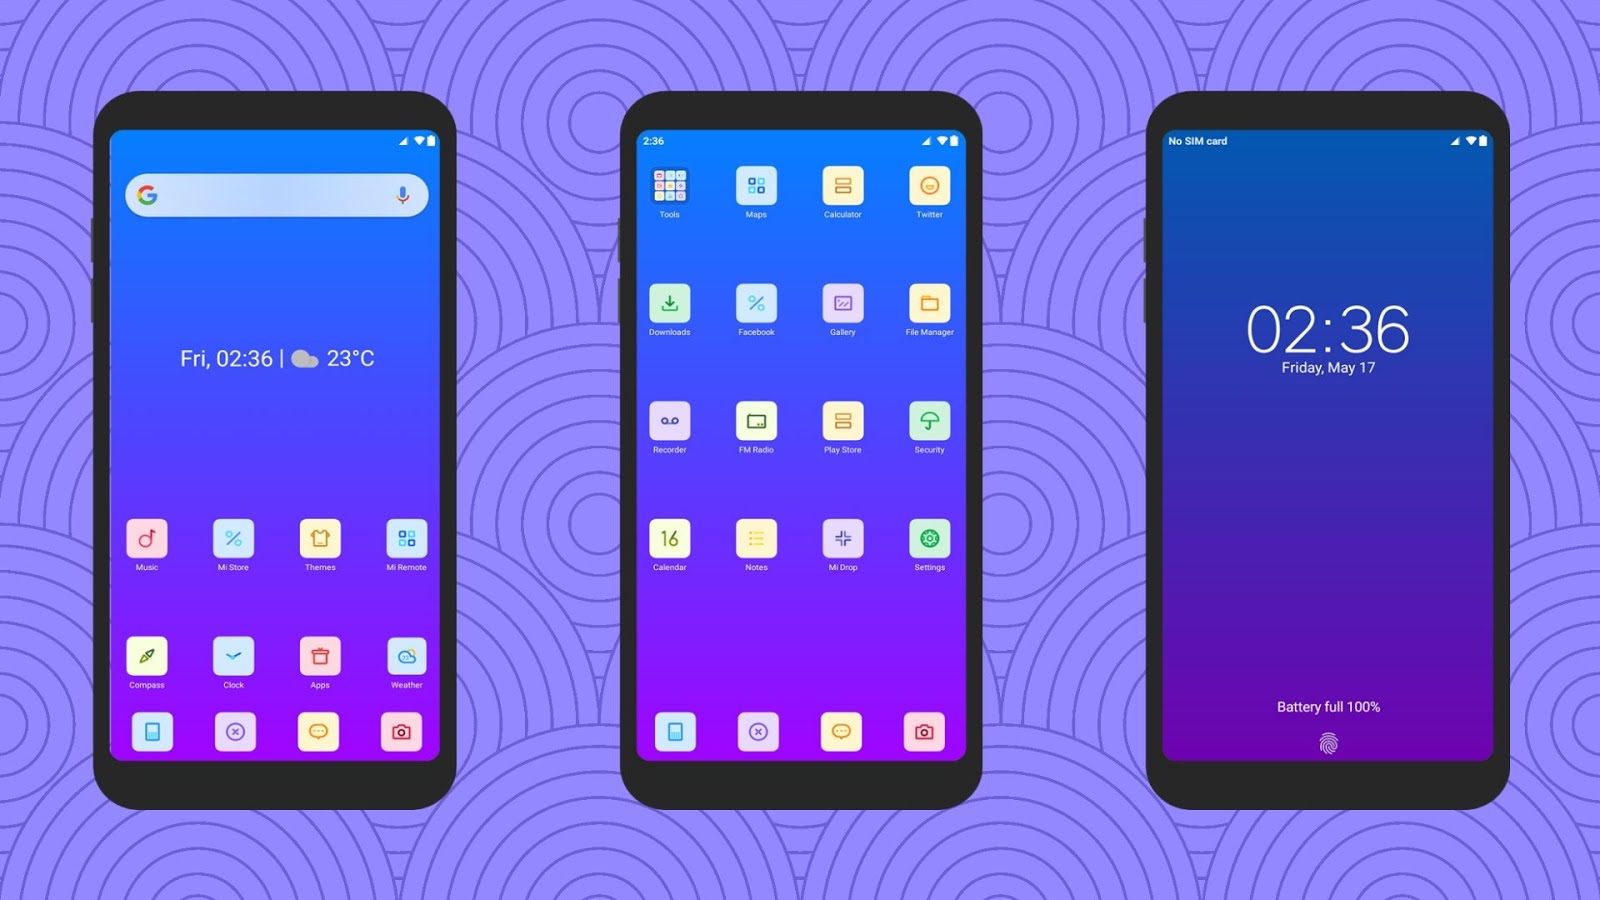 Android Q_DWM19 theme for miui Xiaomi users